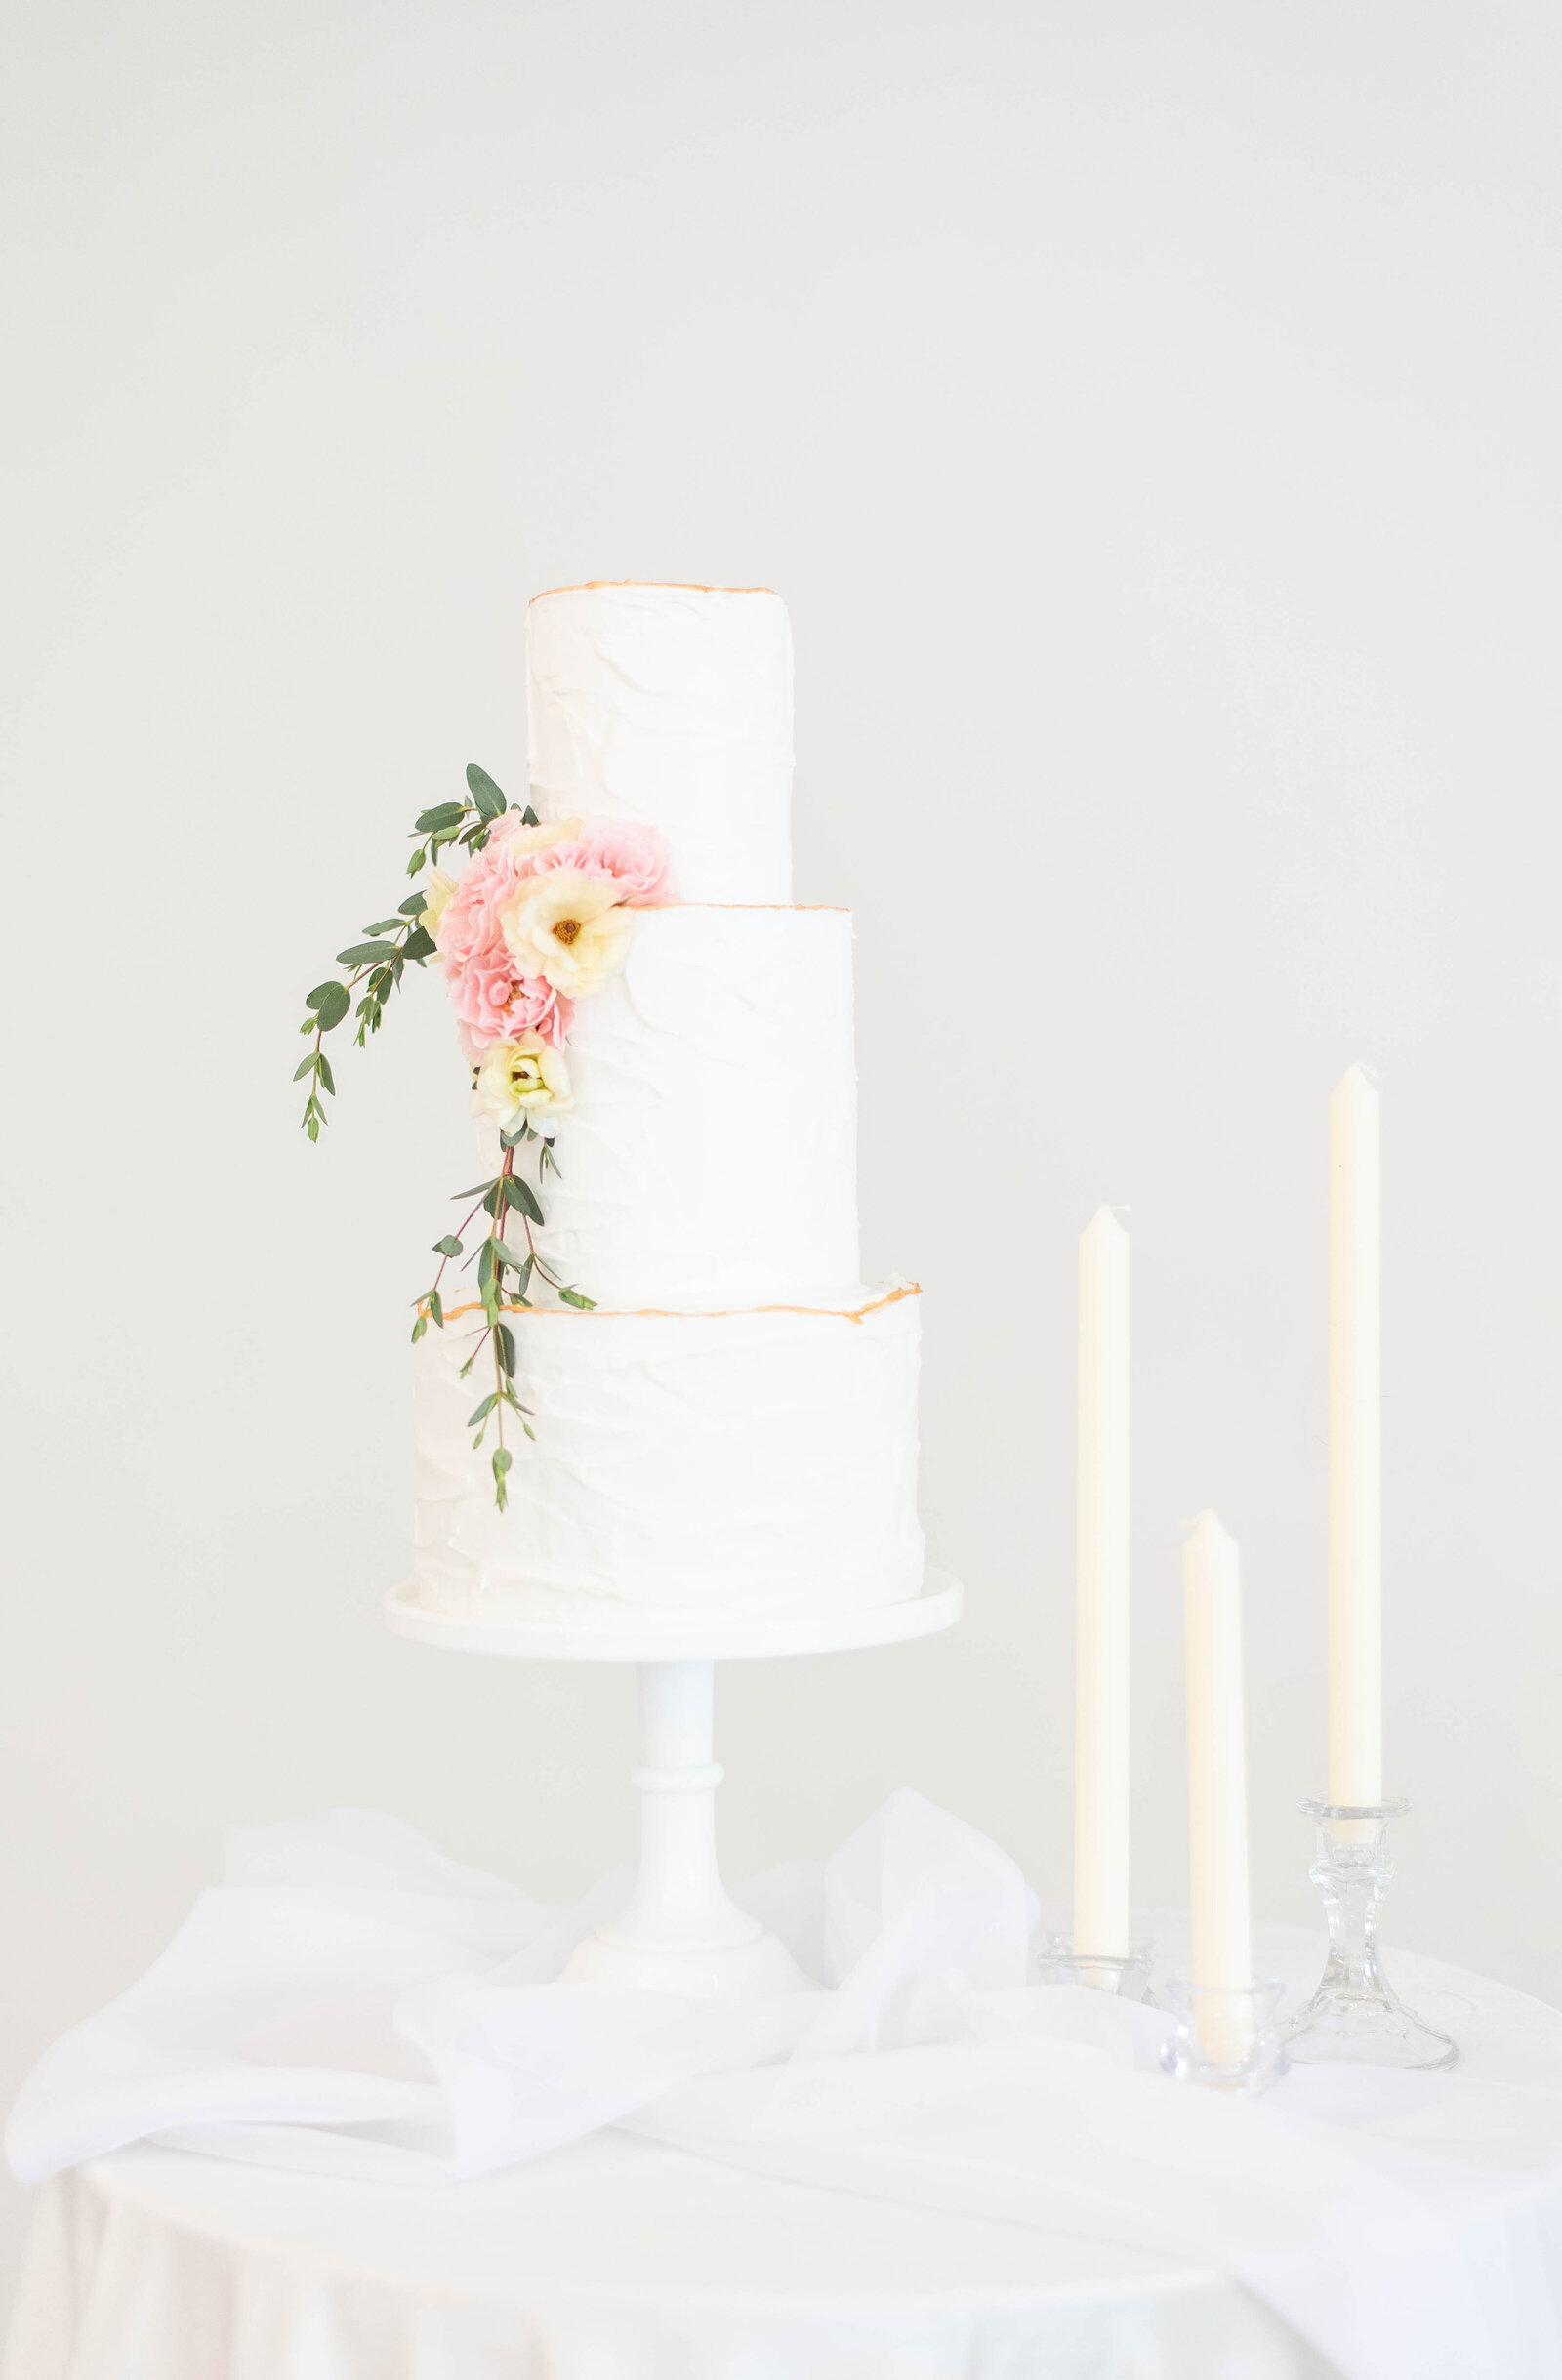 White wedding cake with pink flowers next to candlesticks